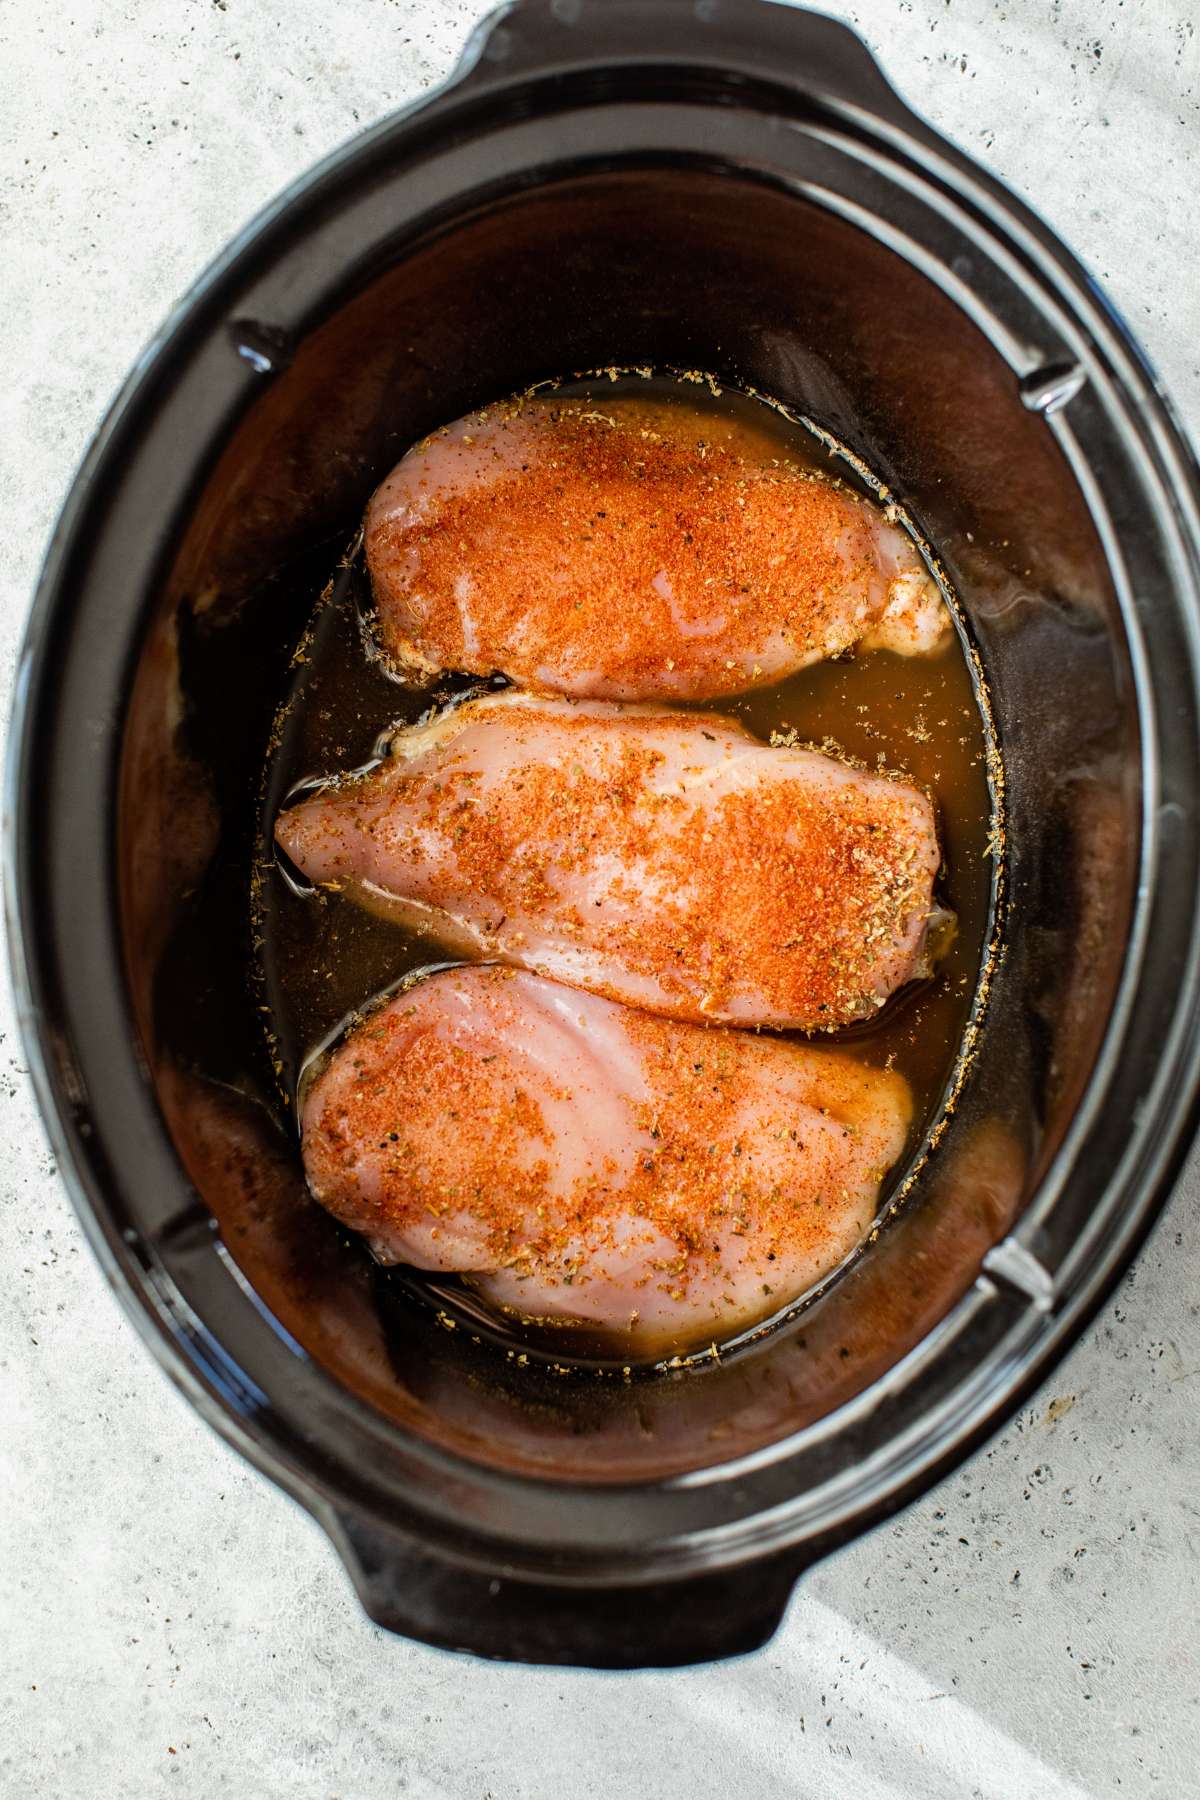 Three chicken breasts with seasoning in a slow cooker.